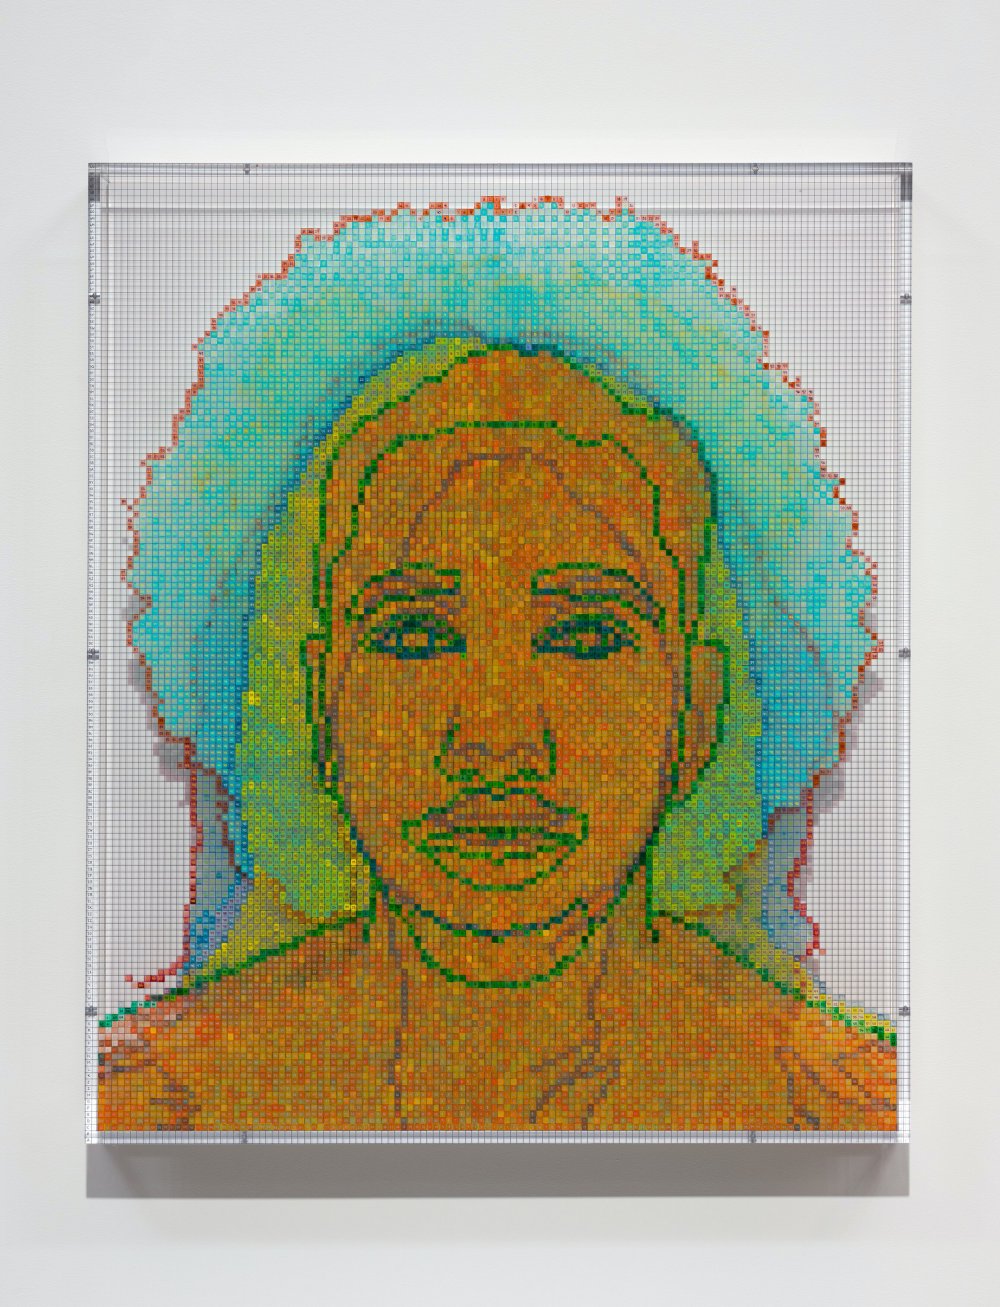 Charles Gaines, Numbers and Faces: Multi-Racial/Ethnic Combinations Series 1: Face #7, Eduardo Soriano-Hewitt (Black/Filipino), 2020